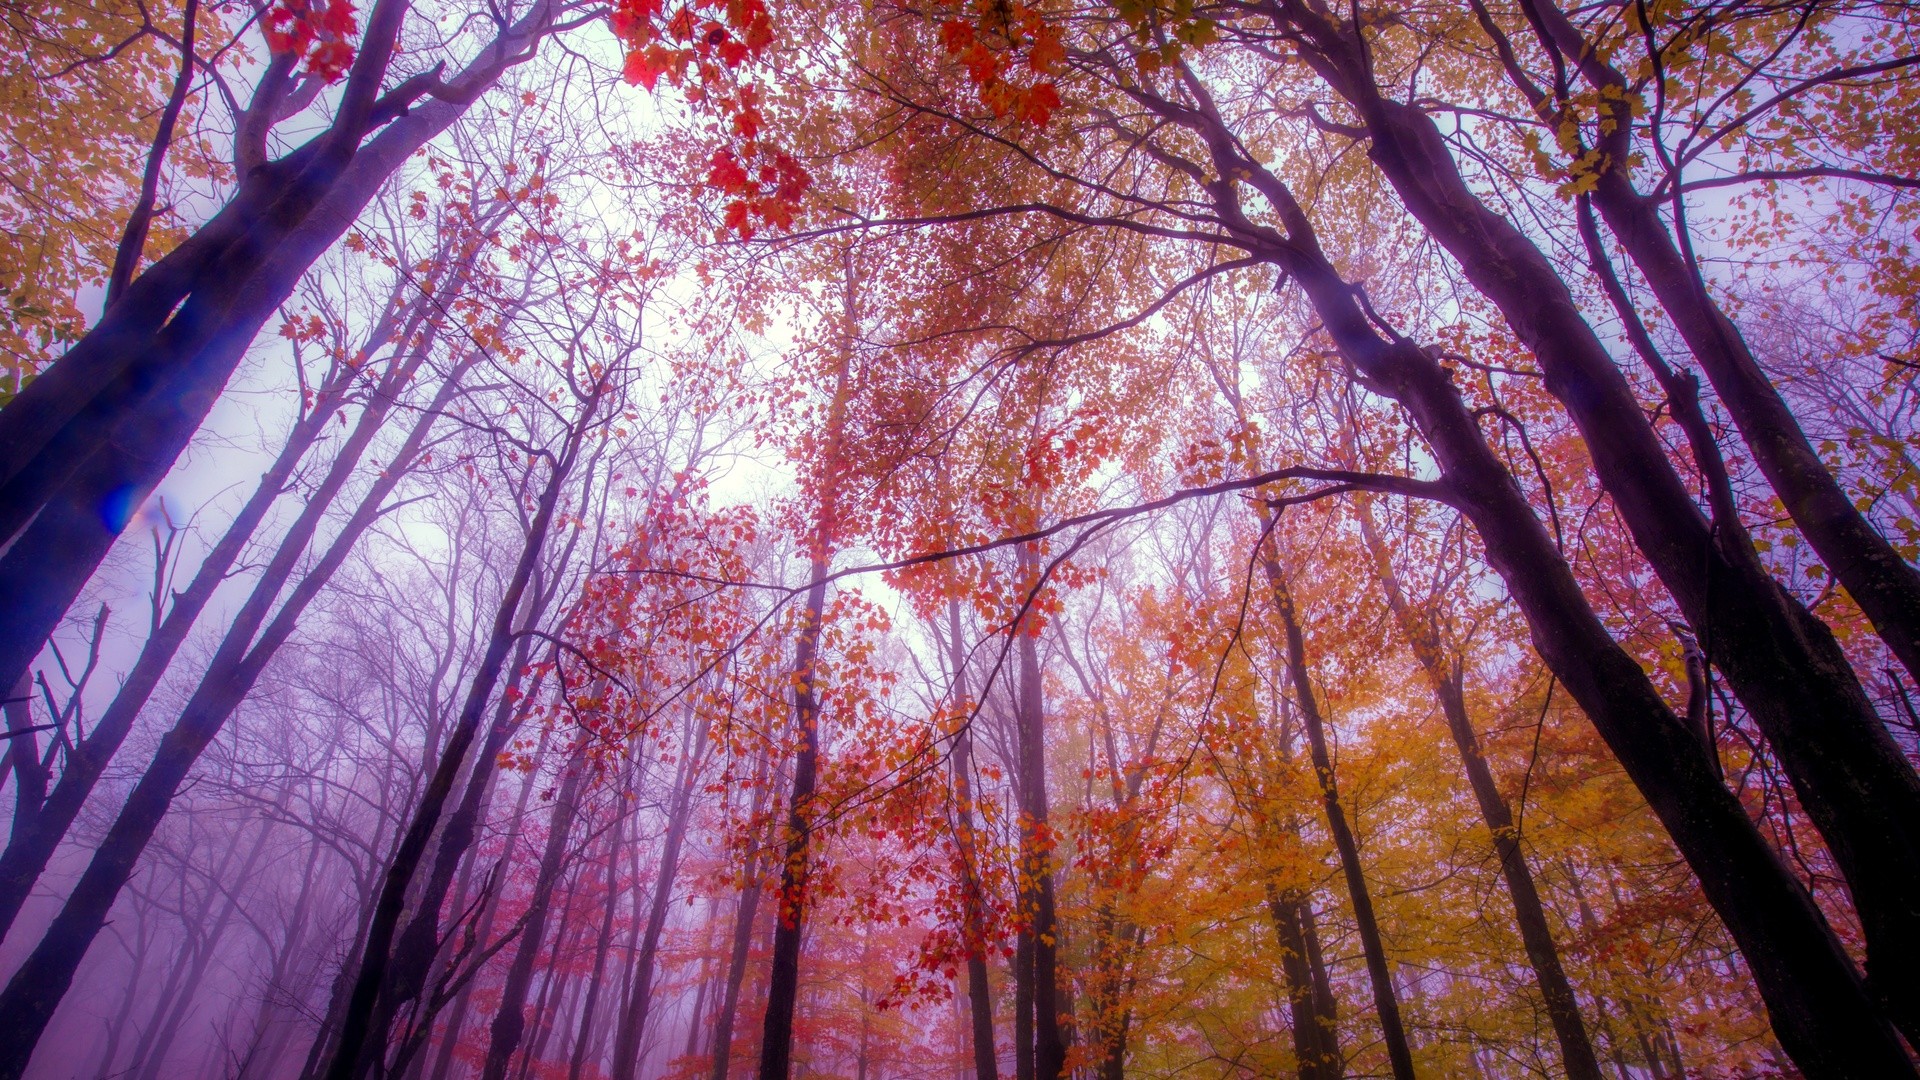 General 1920x1080 trees mist fall color correction forest low-angle nature